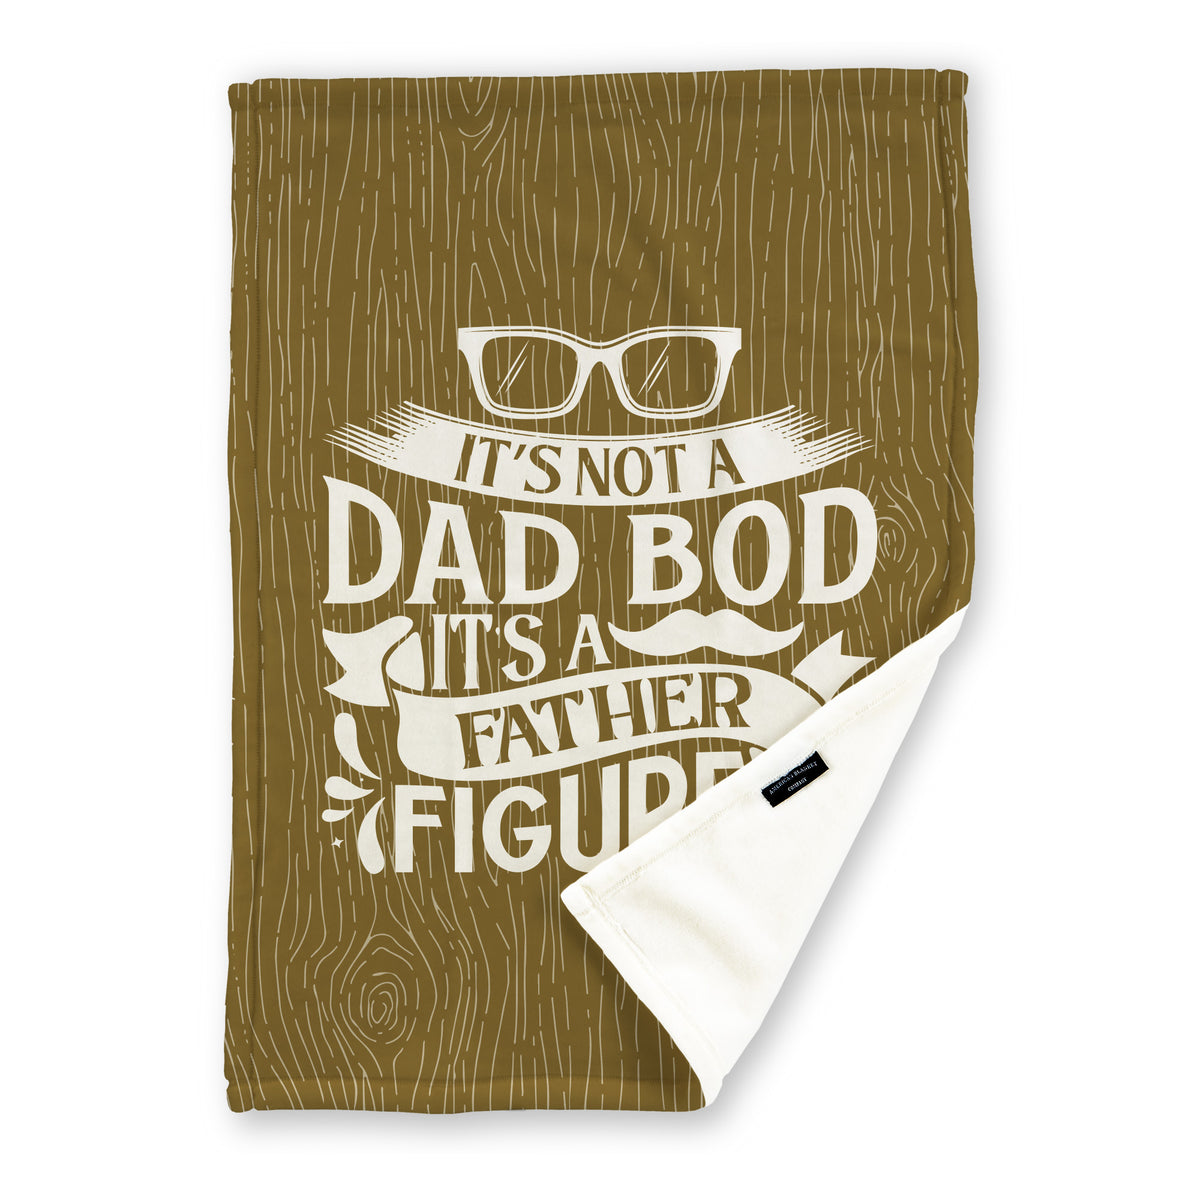 &quot;It&#39;s not a dad bod it&#39;s a father figure&quot; - Luster Loft Fleece Blanket - Printed Blanket - American Blanket Company